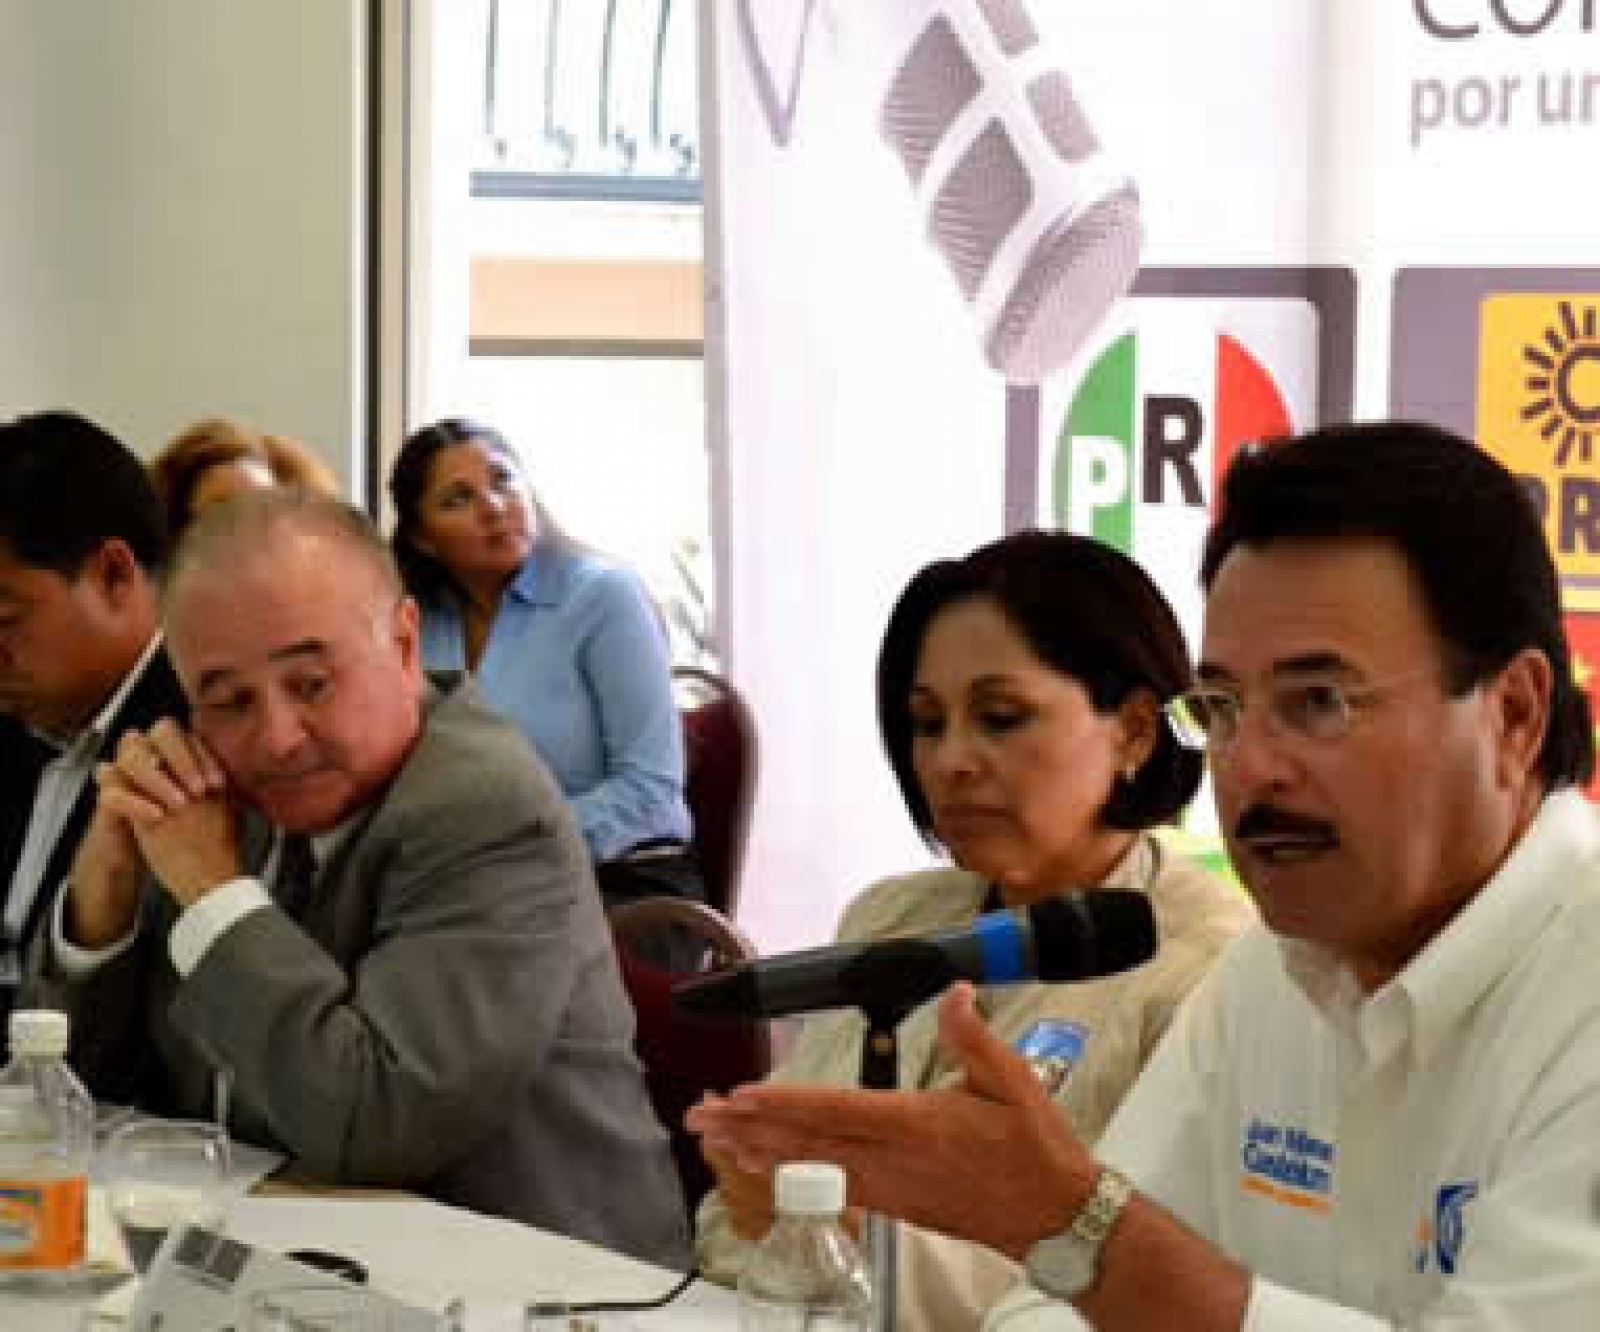 Citizen-Candidate Dialogues in Mexico Seek to Increase Government Responsiveness 